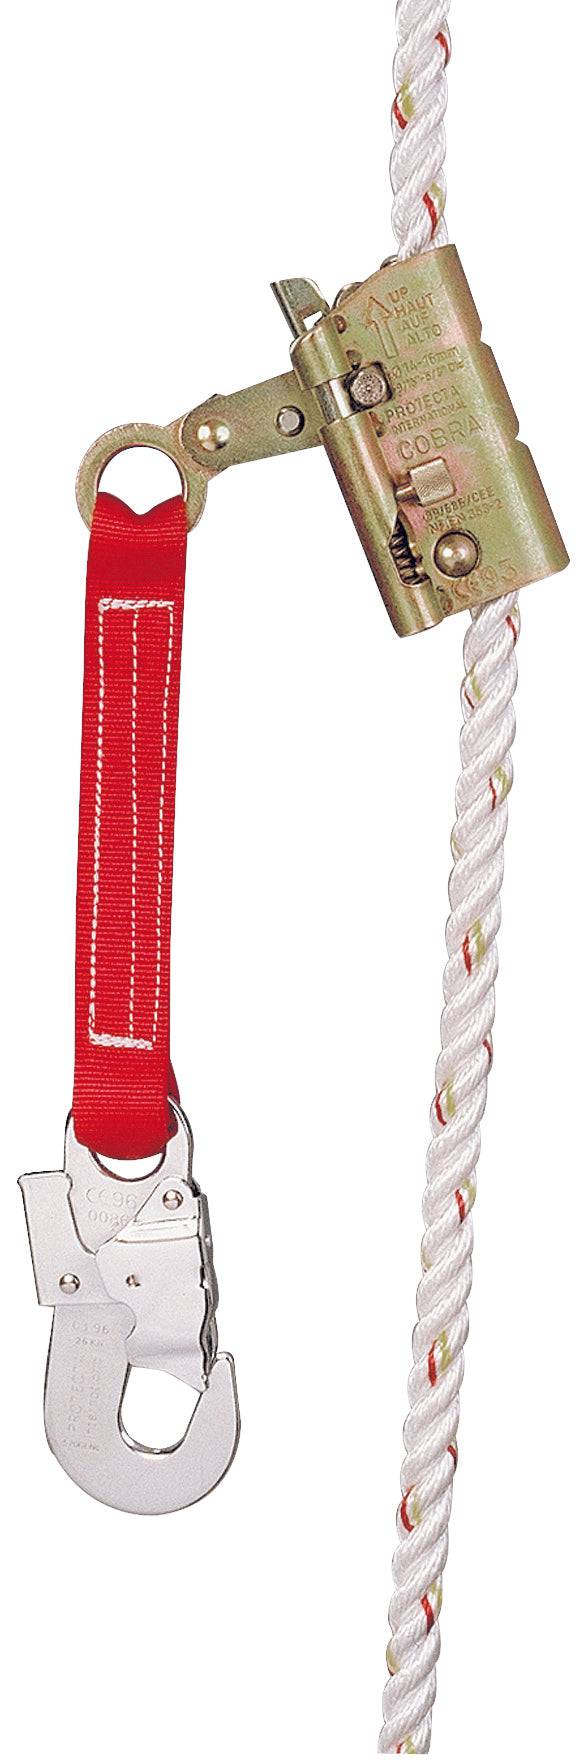 3M Protecta Cobra Rope Grab with Extension Strap & Snap Hook AC202/03 - SecureHeights